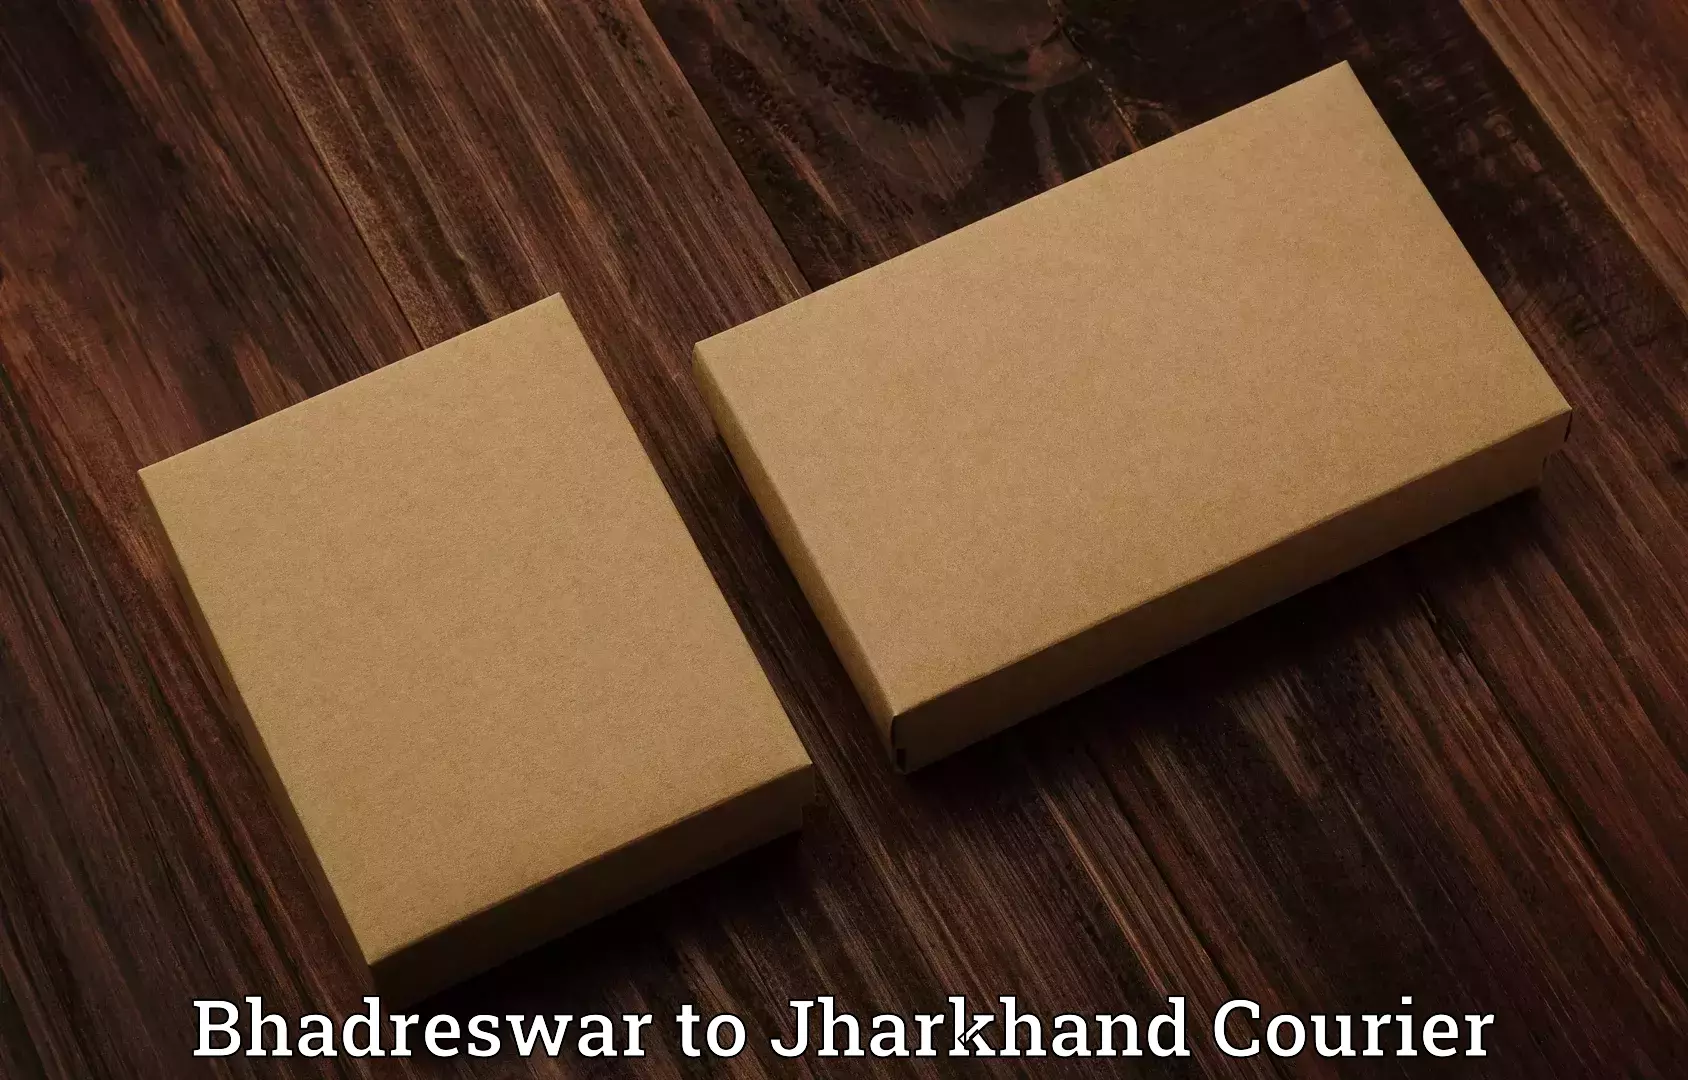 Luggage shipment specialists Bhadreswar to Dhanbad